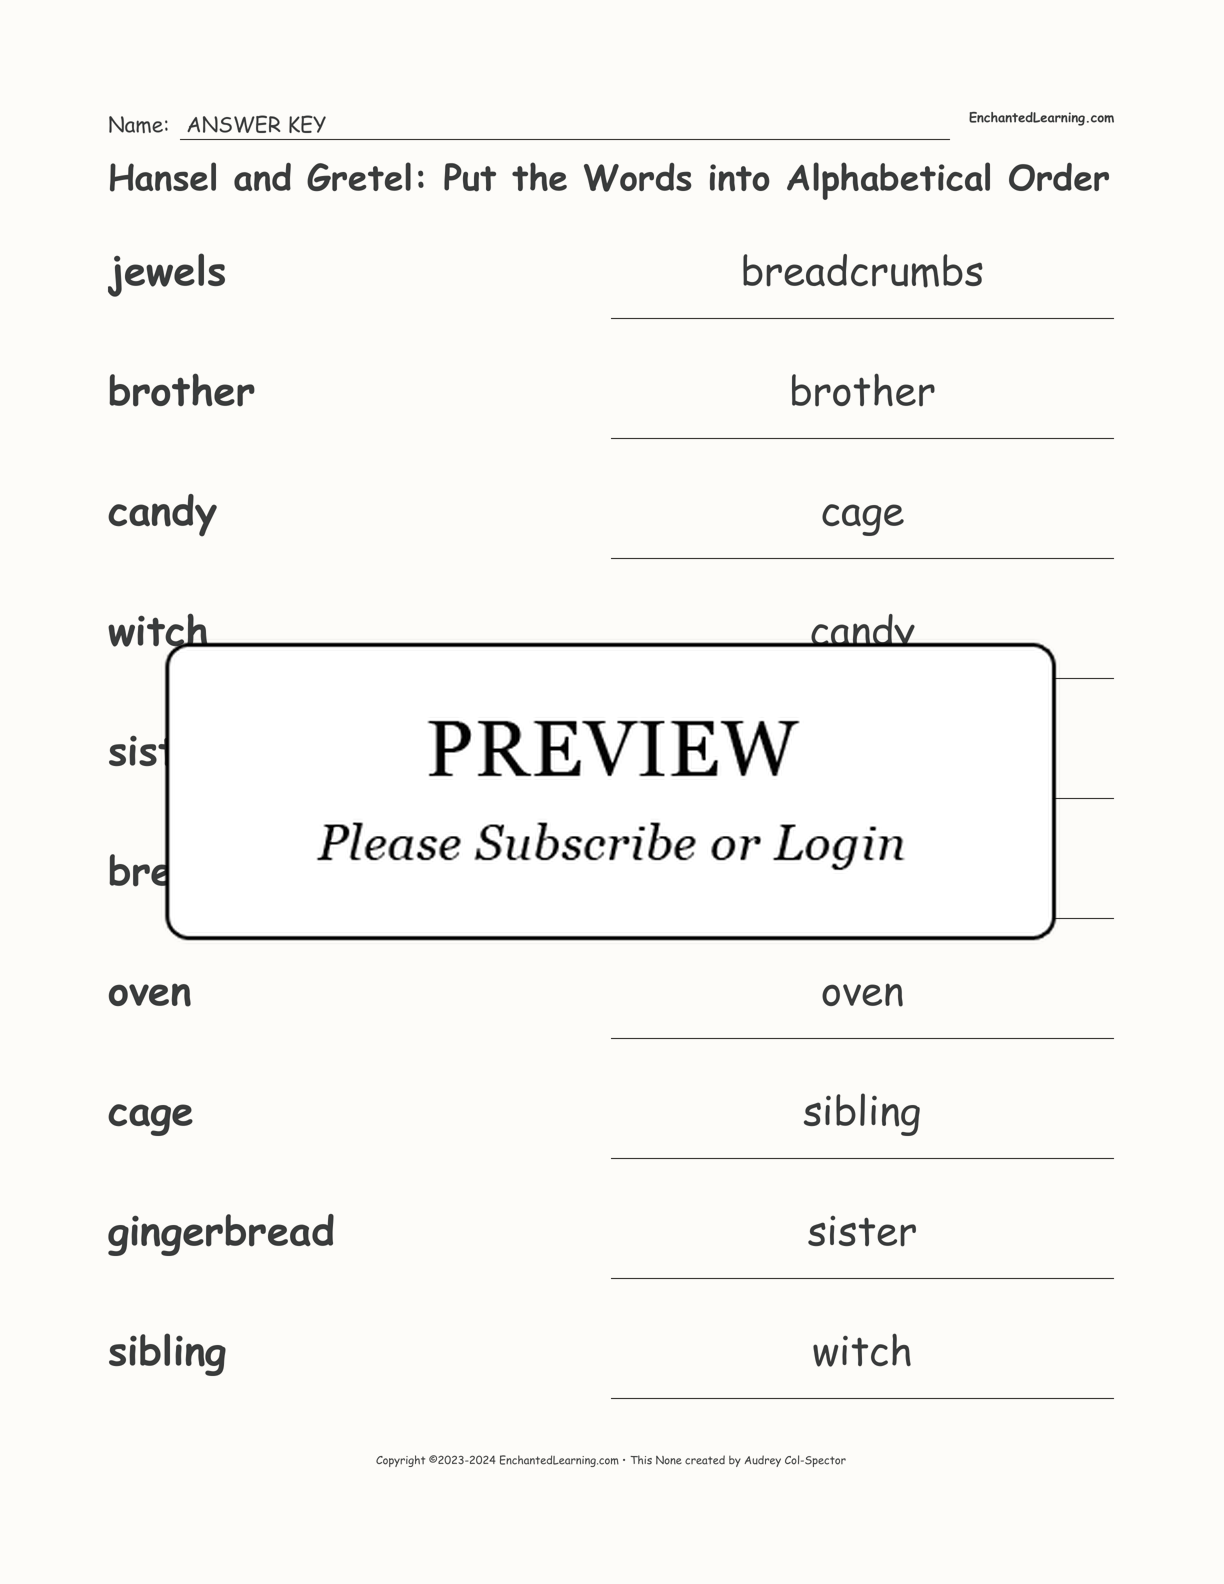 Hansel and Gretel: Put the Words into Alphabetical Order interactive worksheet page 2